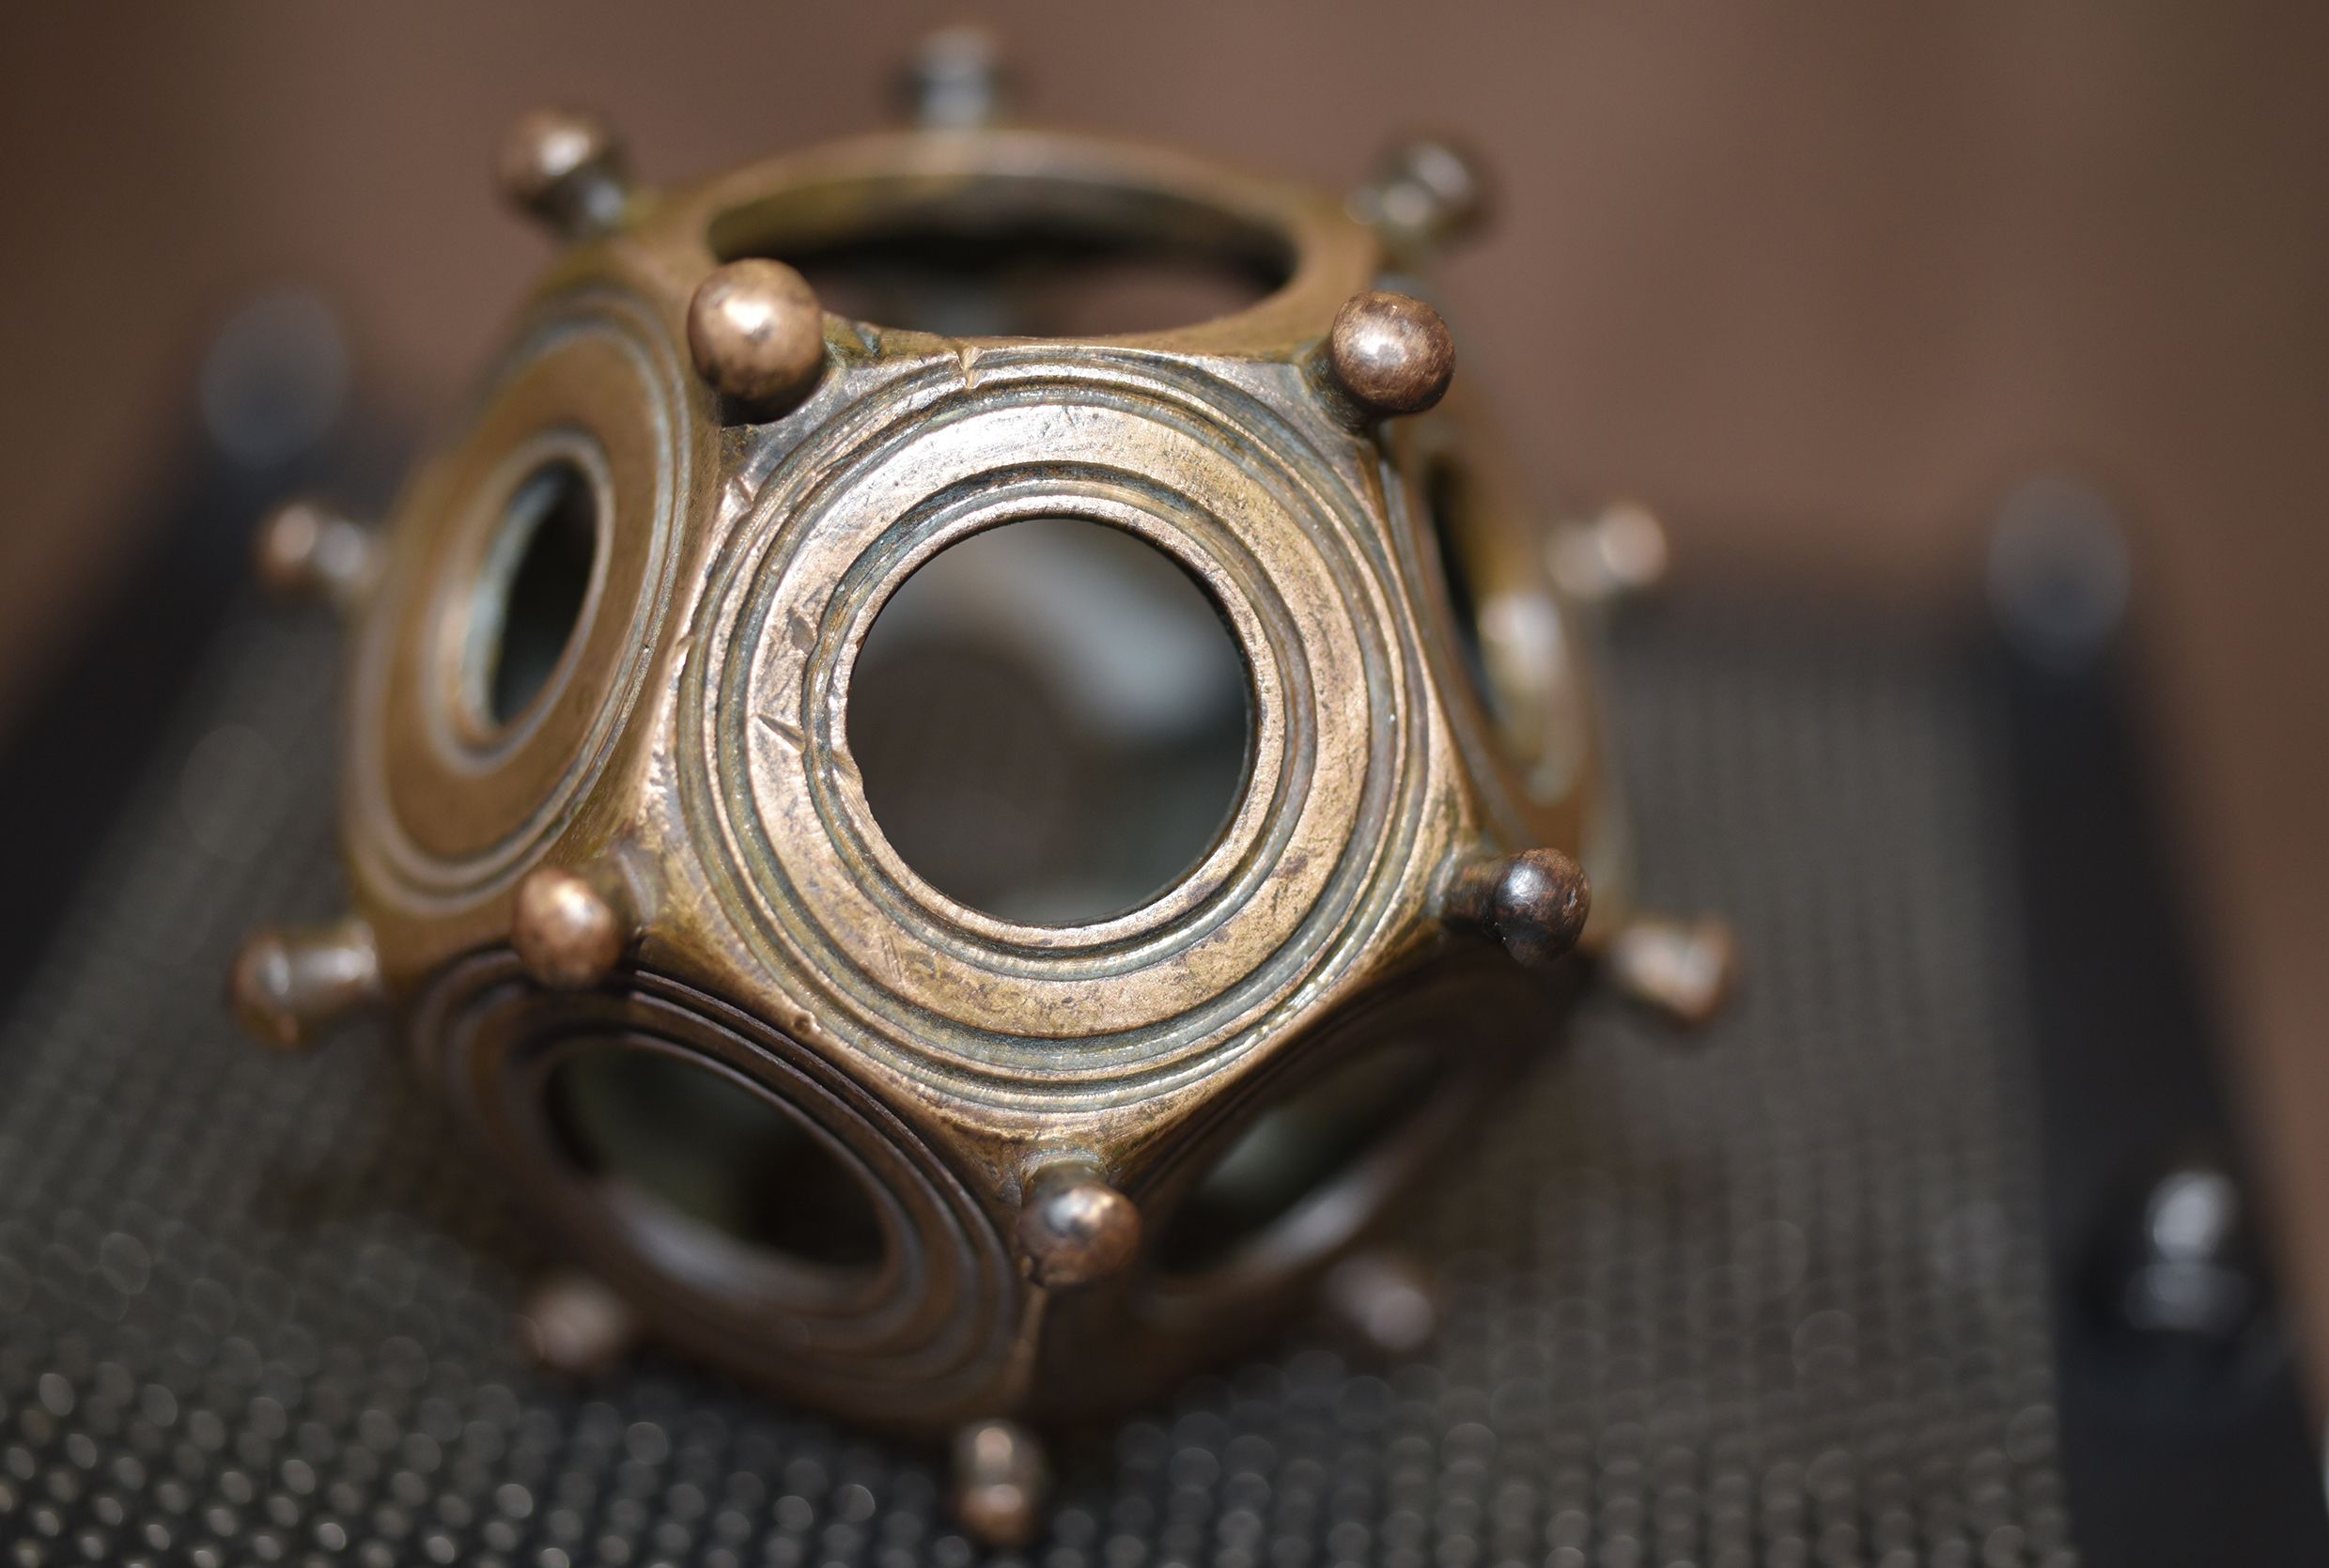 12 Most Mysterious Ancient Sphere Objects